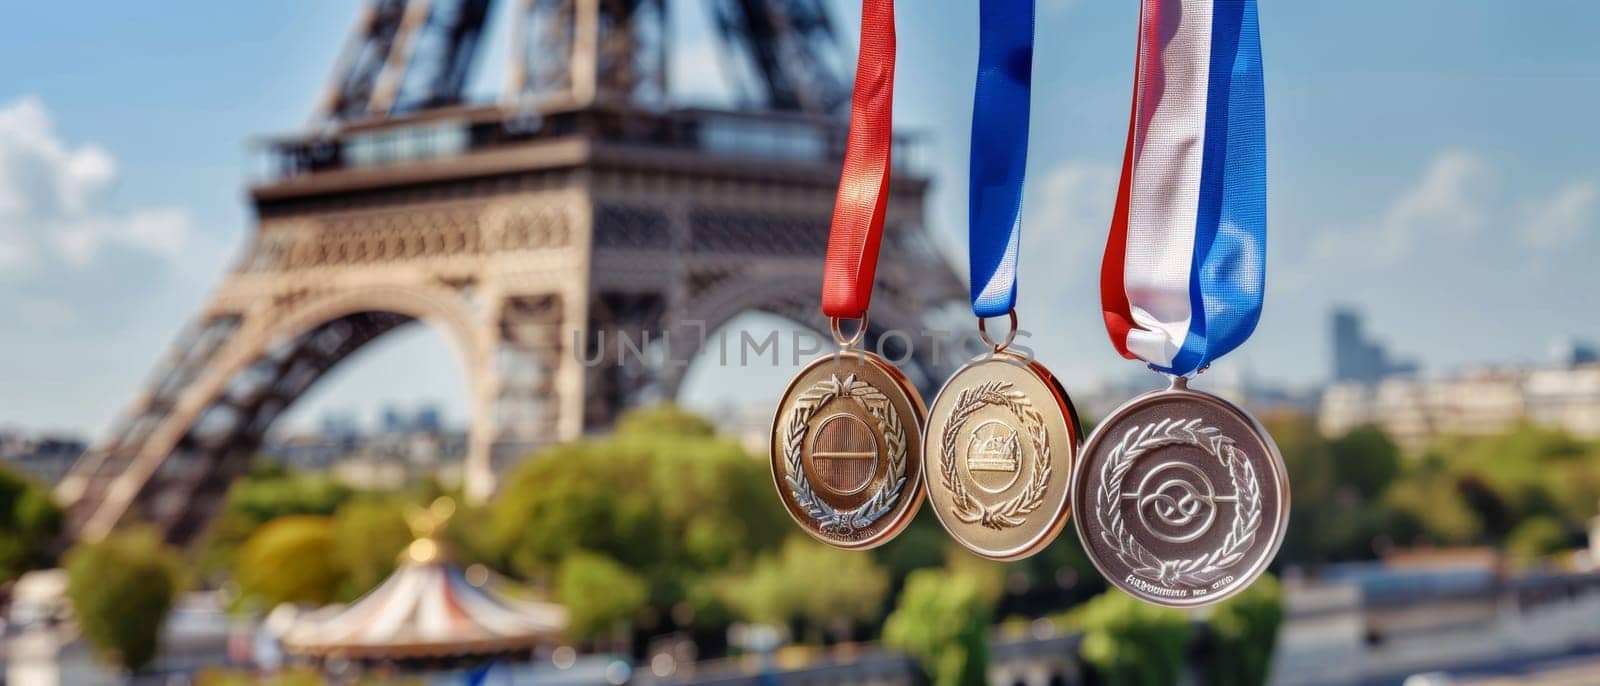 Sunlight catches on a series of medals against the Paris skyline, with the Eiffel Tower standing majestic in the background